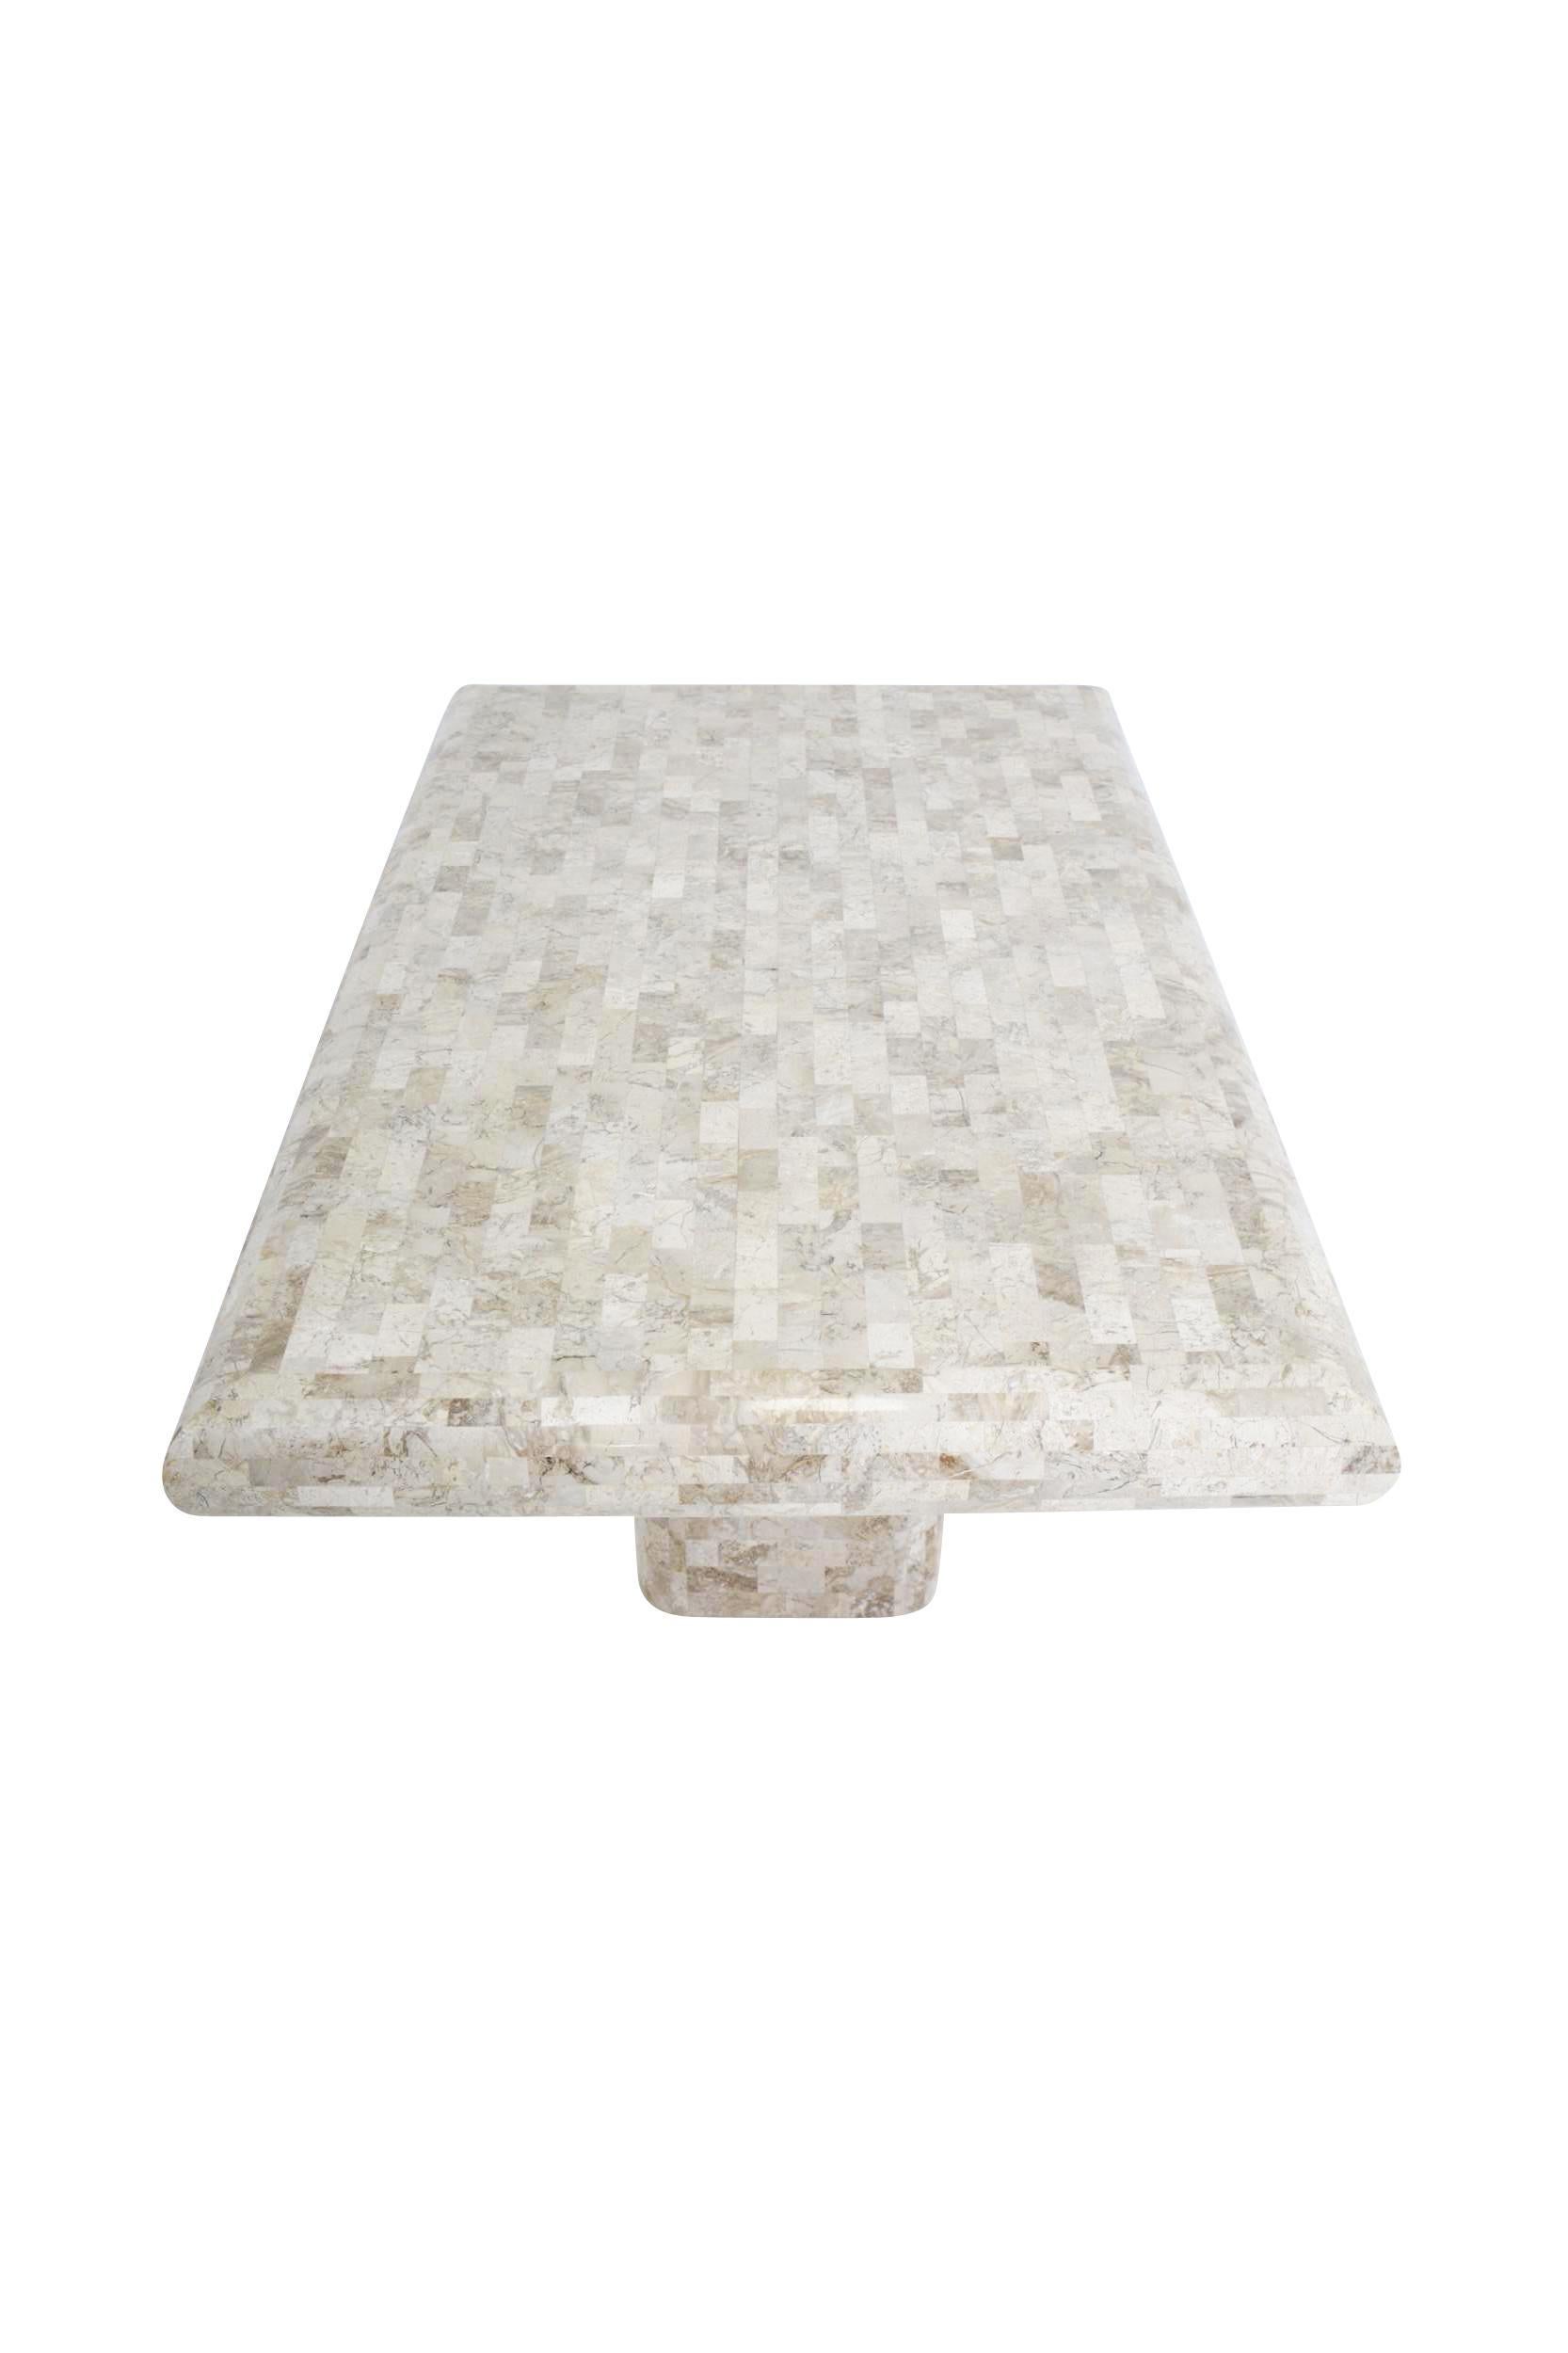 American Tessellated Travertine Dining Table, 1970s